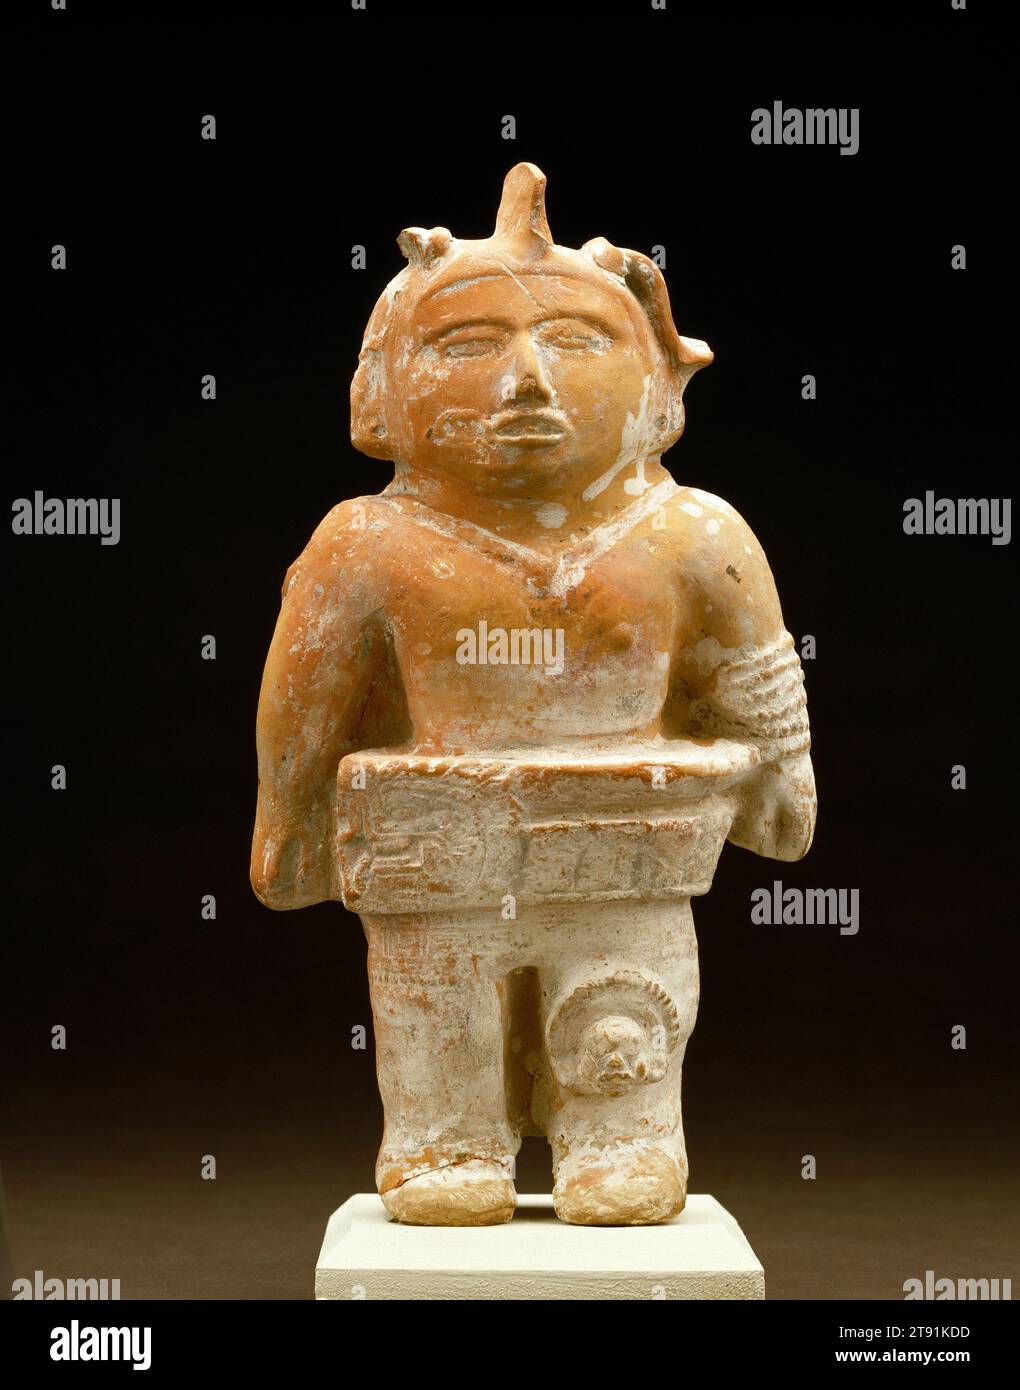 Figure, c. 600-750 CE, 11 x 5 3/4 x 2 3/8 in. (27.94 x 14.61 x 6.03 cm), Clay, pigments, Mexico, 7th-8th century, Originating around 1500 B.C. among the Olmec, the Mesoamerican ballgame was the first team sport in human history. While there were localized variations in the game that was played from New Mexico to Honduras to the Caribbean, there were also many consistent features. Players' hands were only used to put the ball into play, after which it was deflected with the hips, knees, elbows, feet, and head. Stock Photo